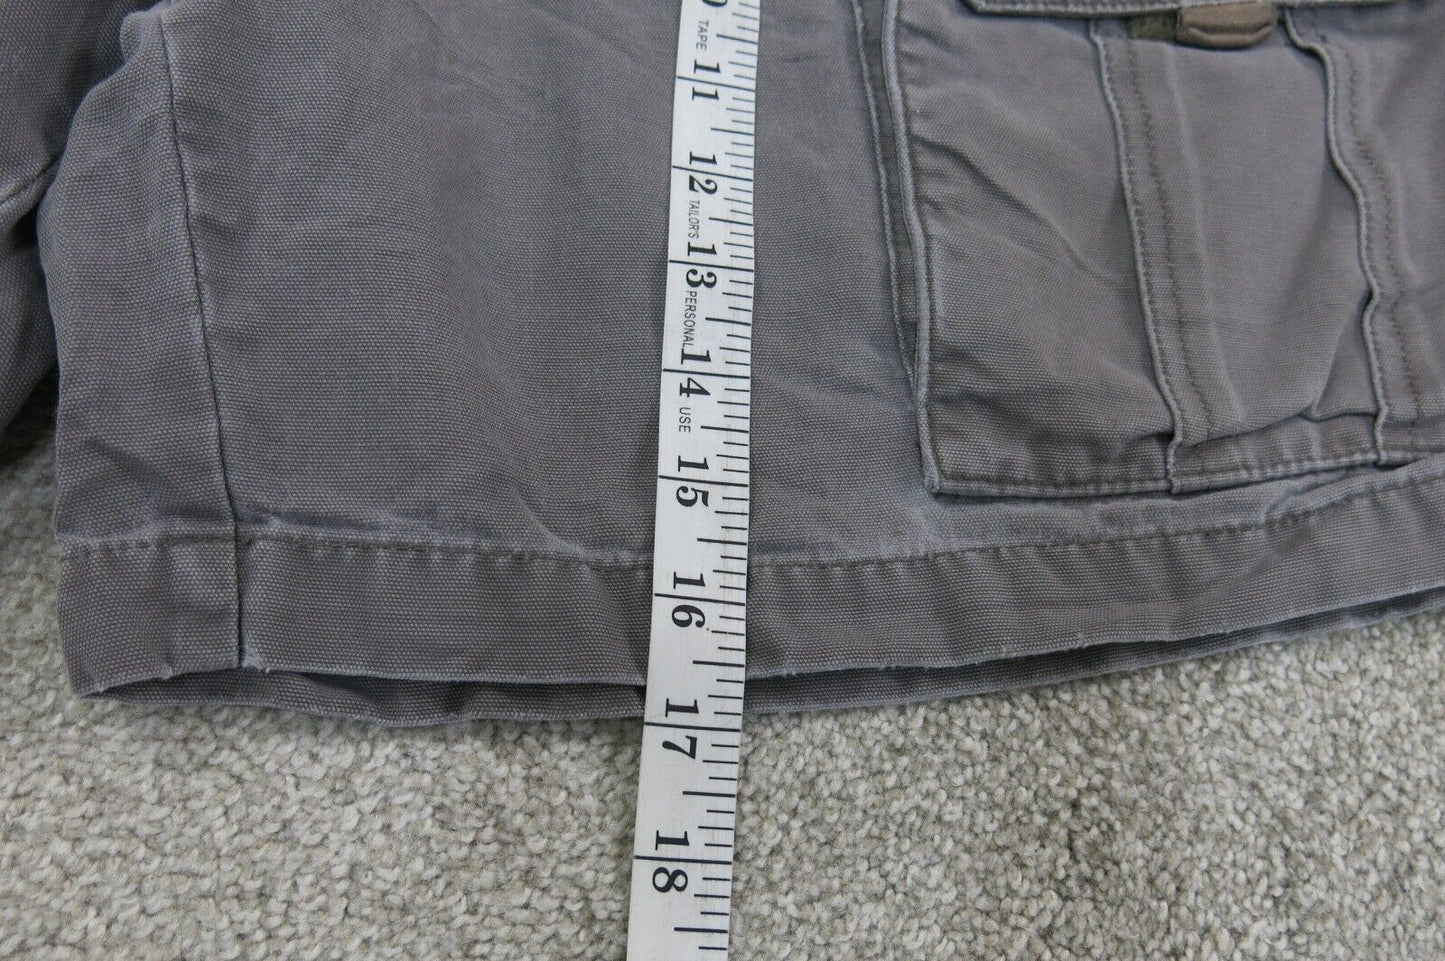 Columbia Shorts Mens Large Gray Cargo Pockets Cotton Casual Outdoors Work Wear